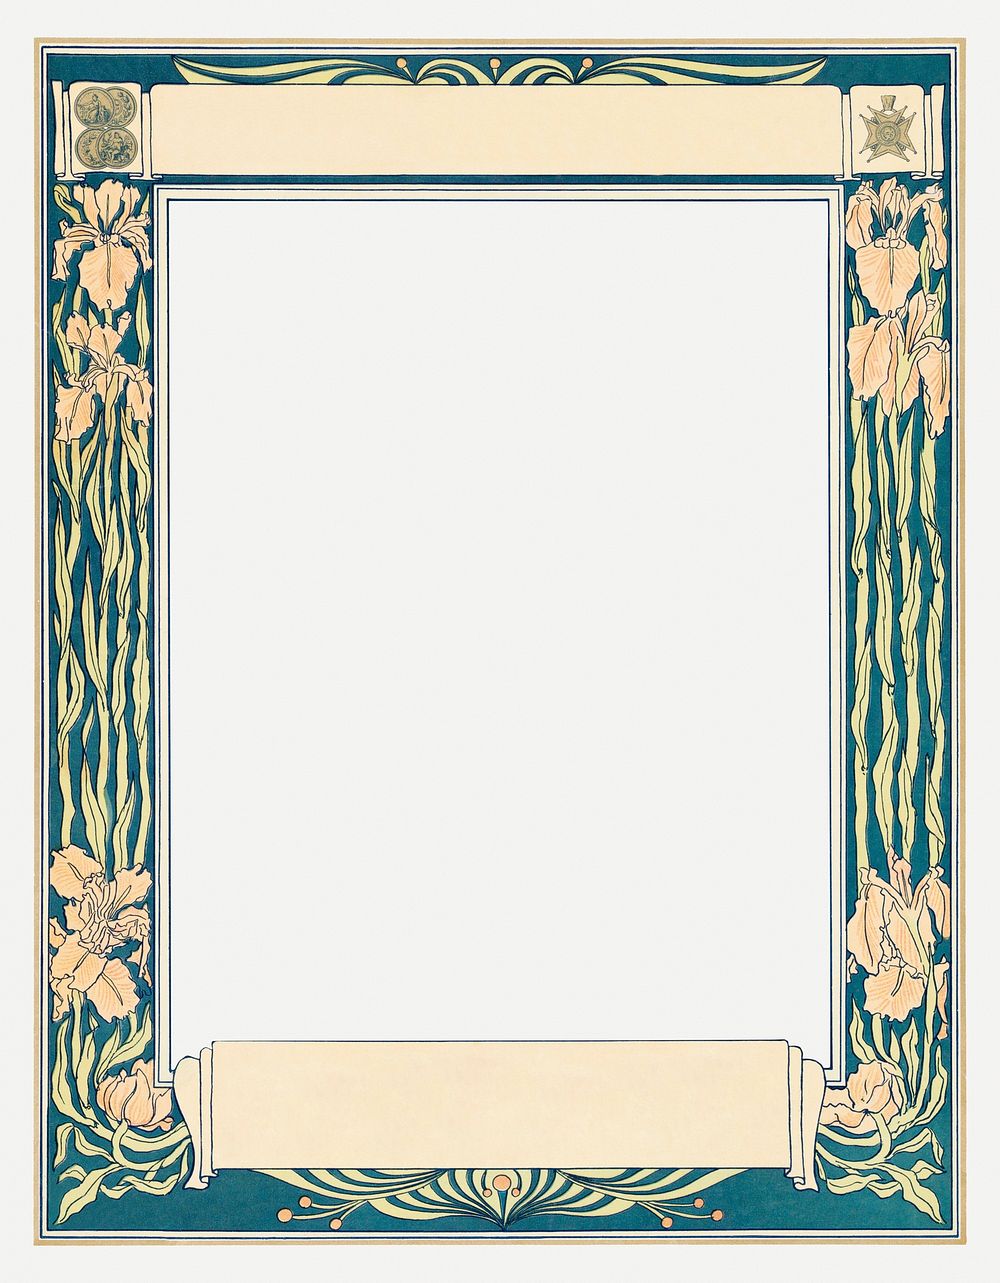 Frame psd with vintage green floral border, remixed from the artworks by Johann Georg van Caspel